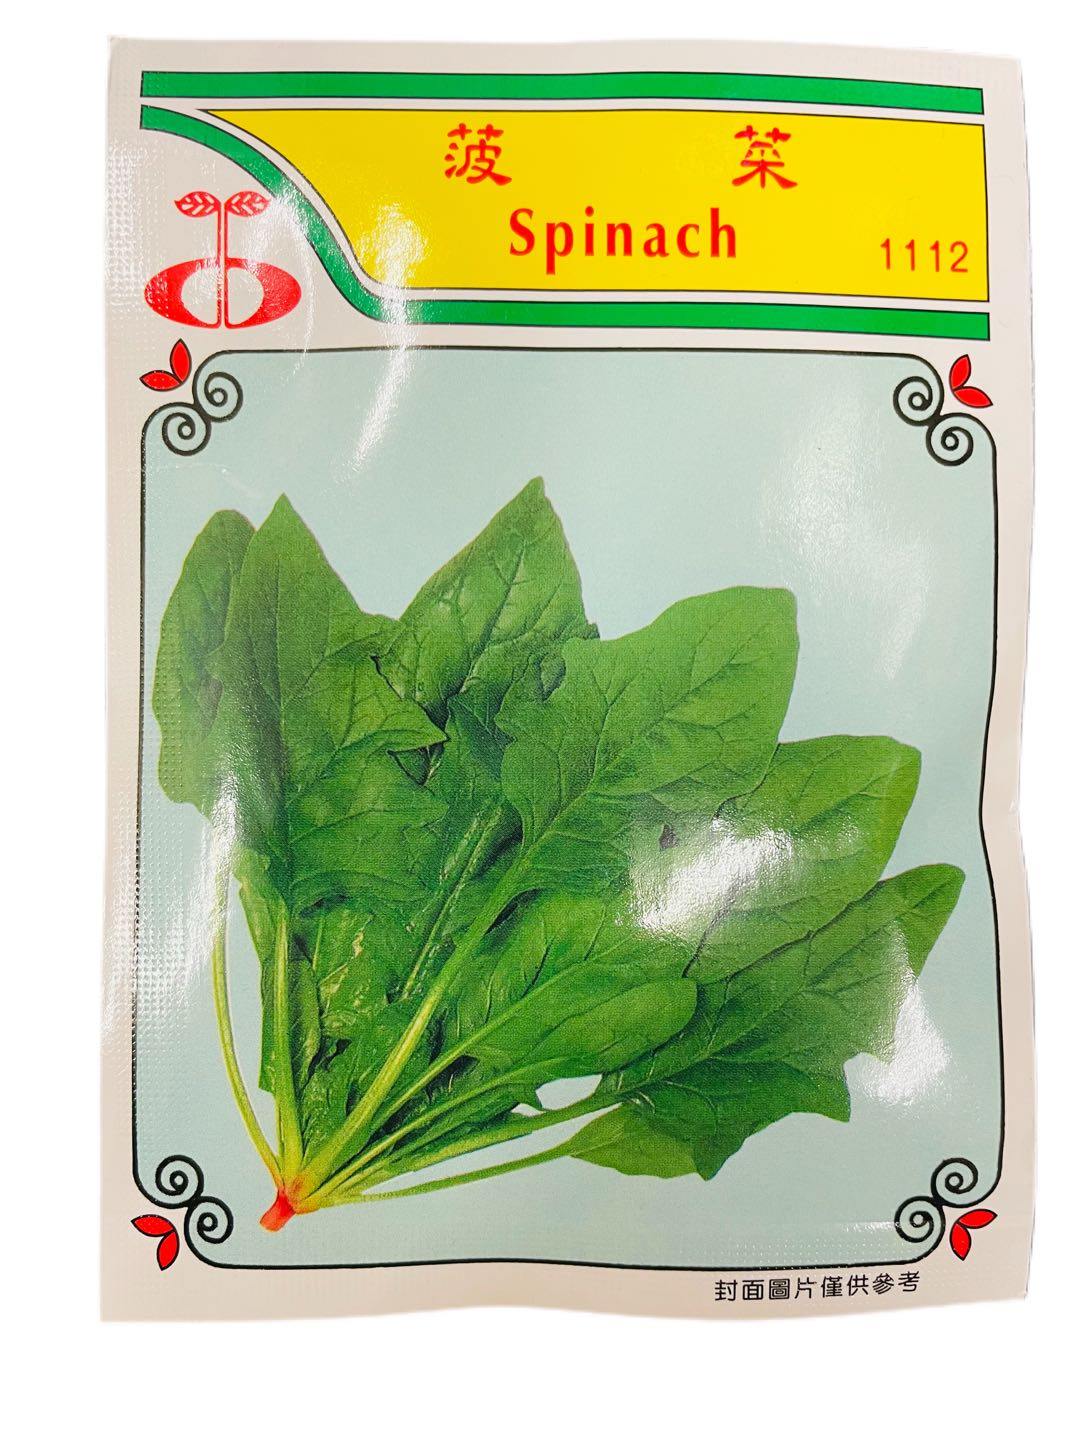 SPINACH (SPINACIA OLERACEA) (ENGLISH SPINACH) (POH CHOY) - Premium Co  Groceries 